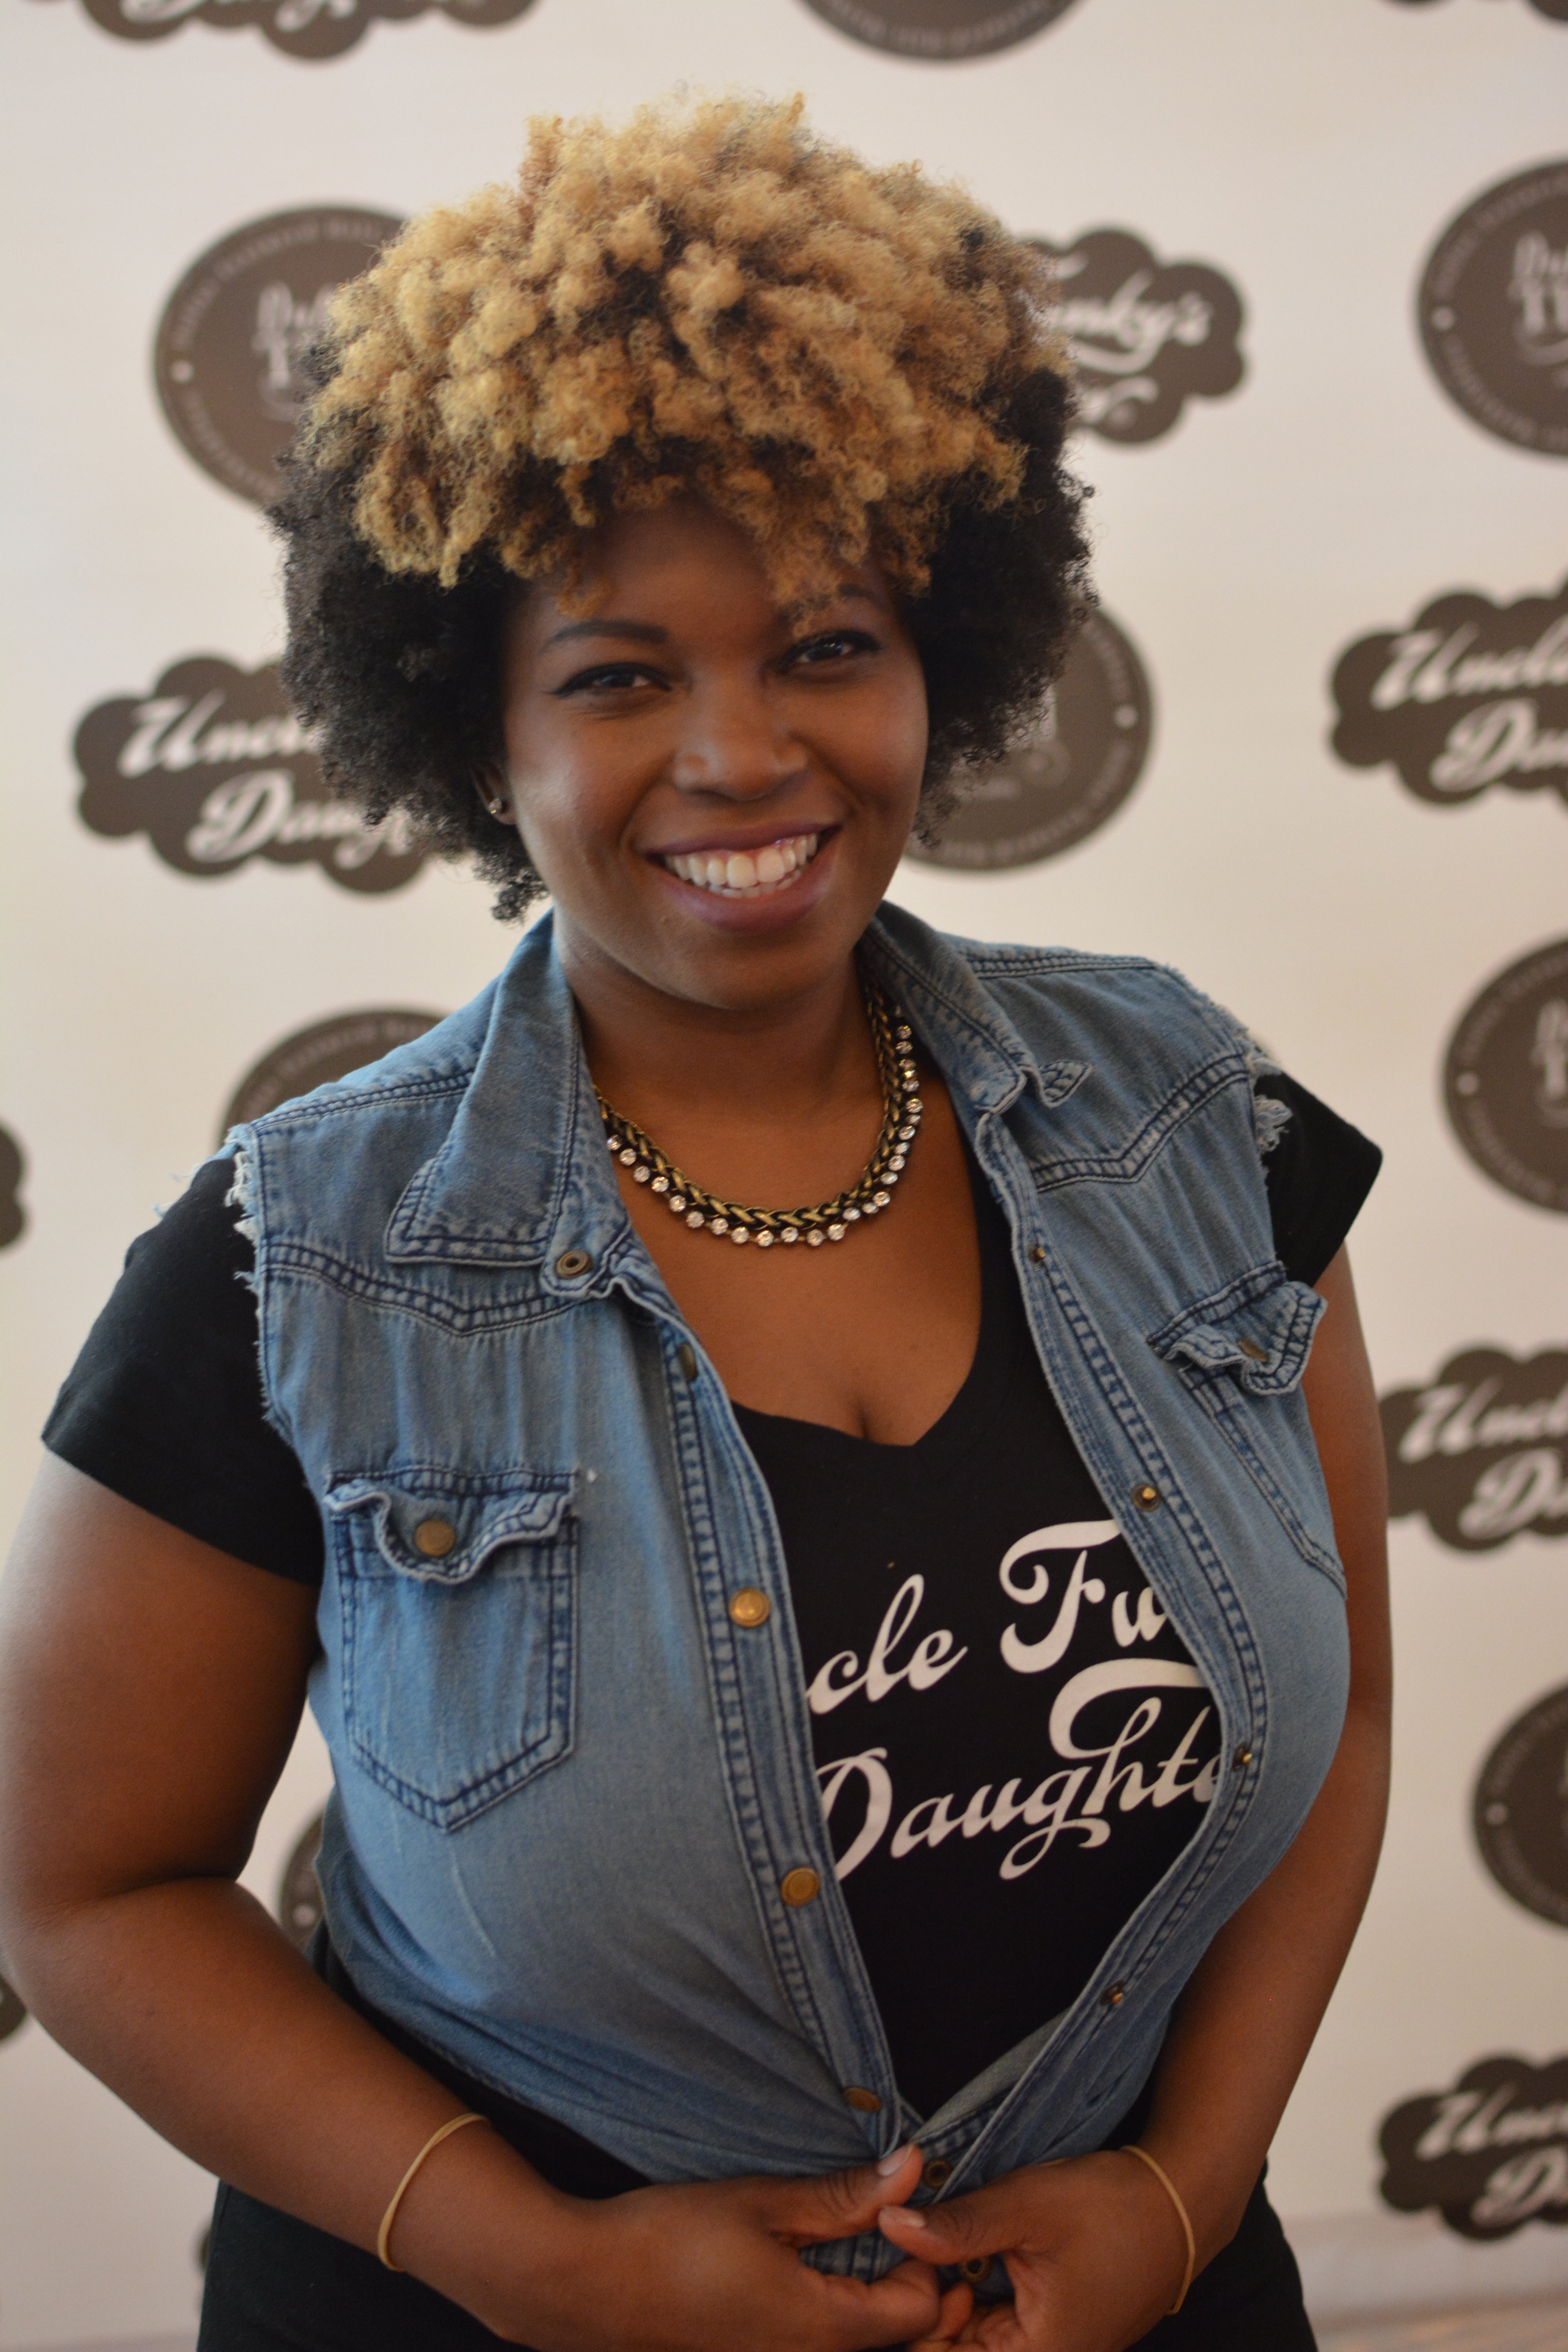 Hair Street Style: Dallas Girls Brings Natural Curls To Life
